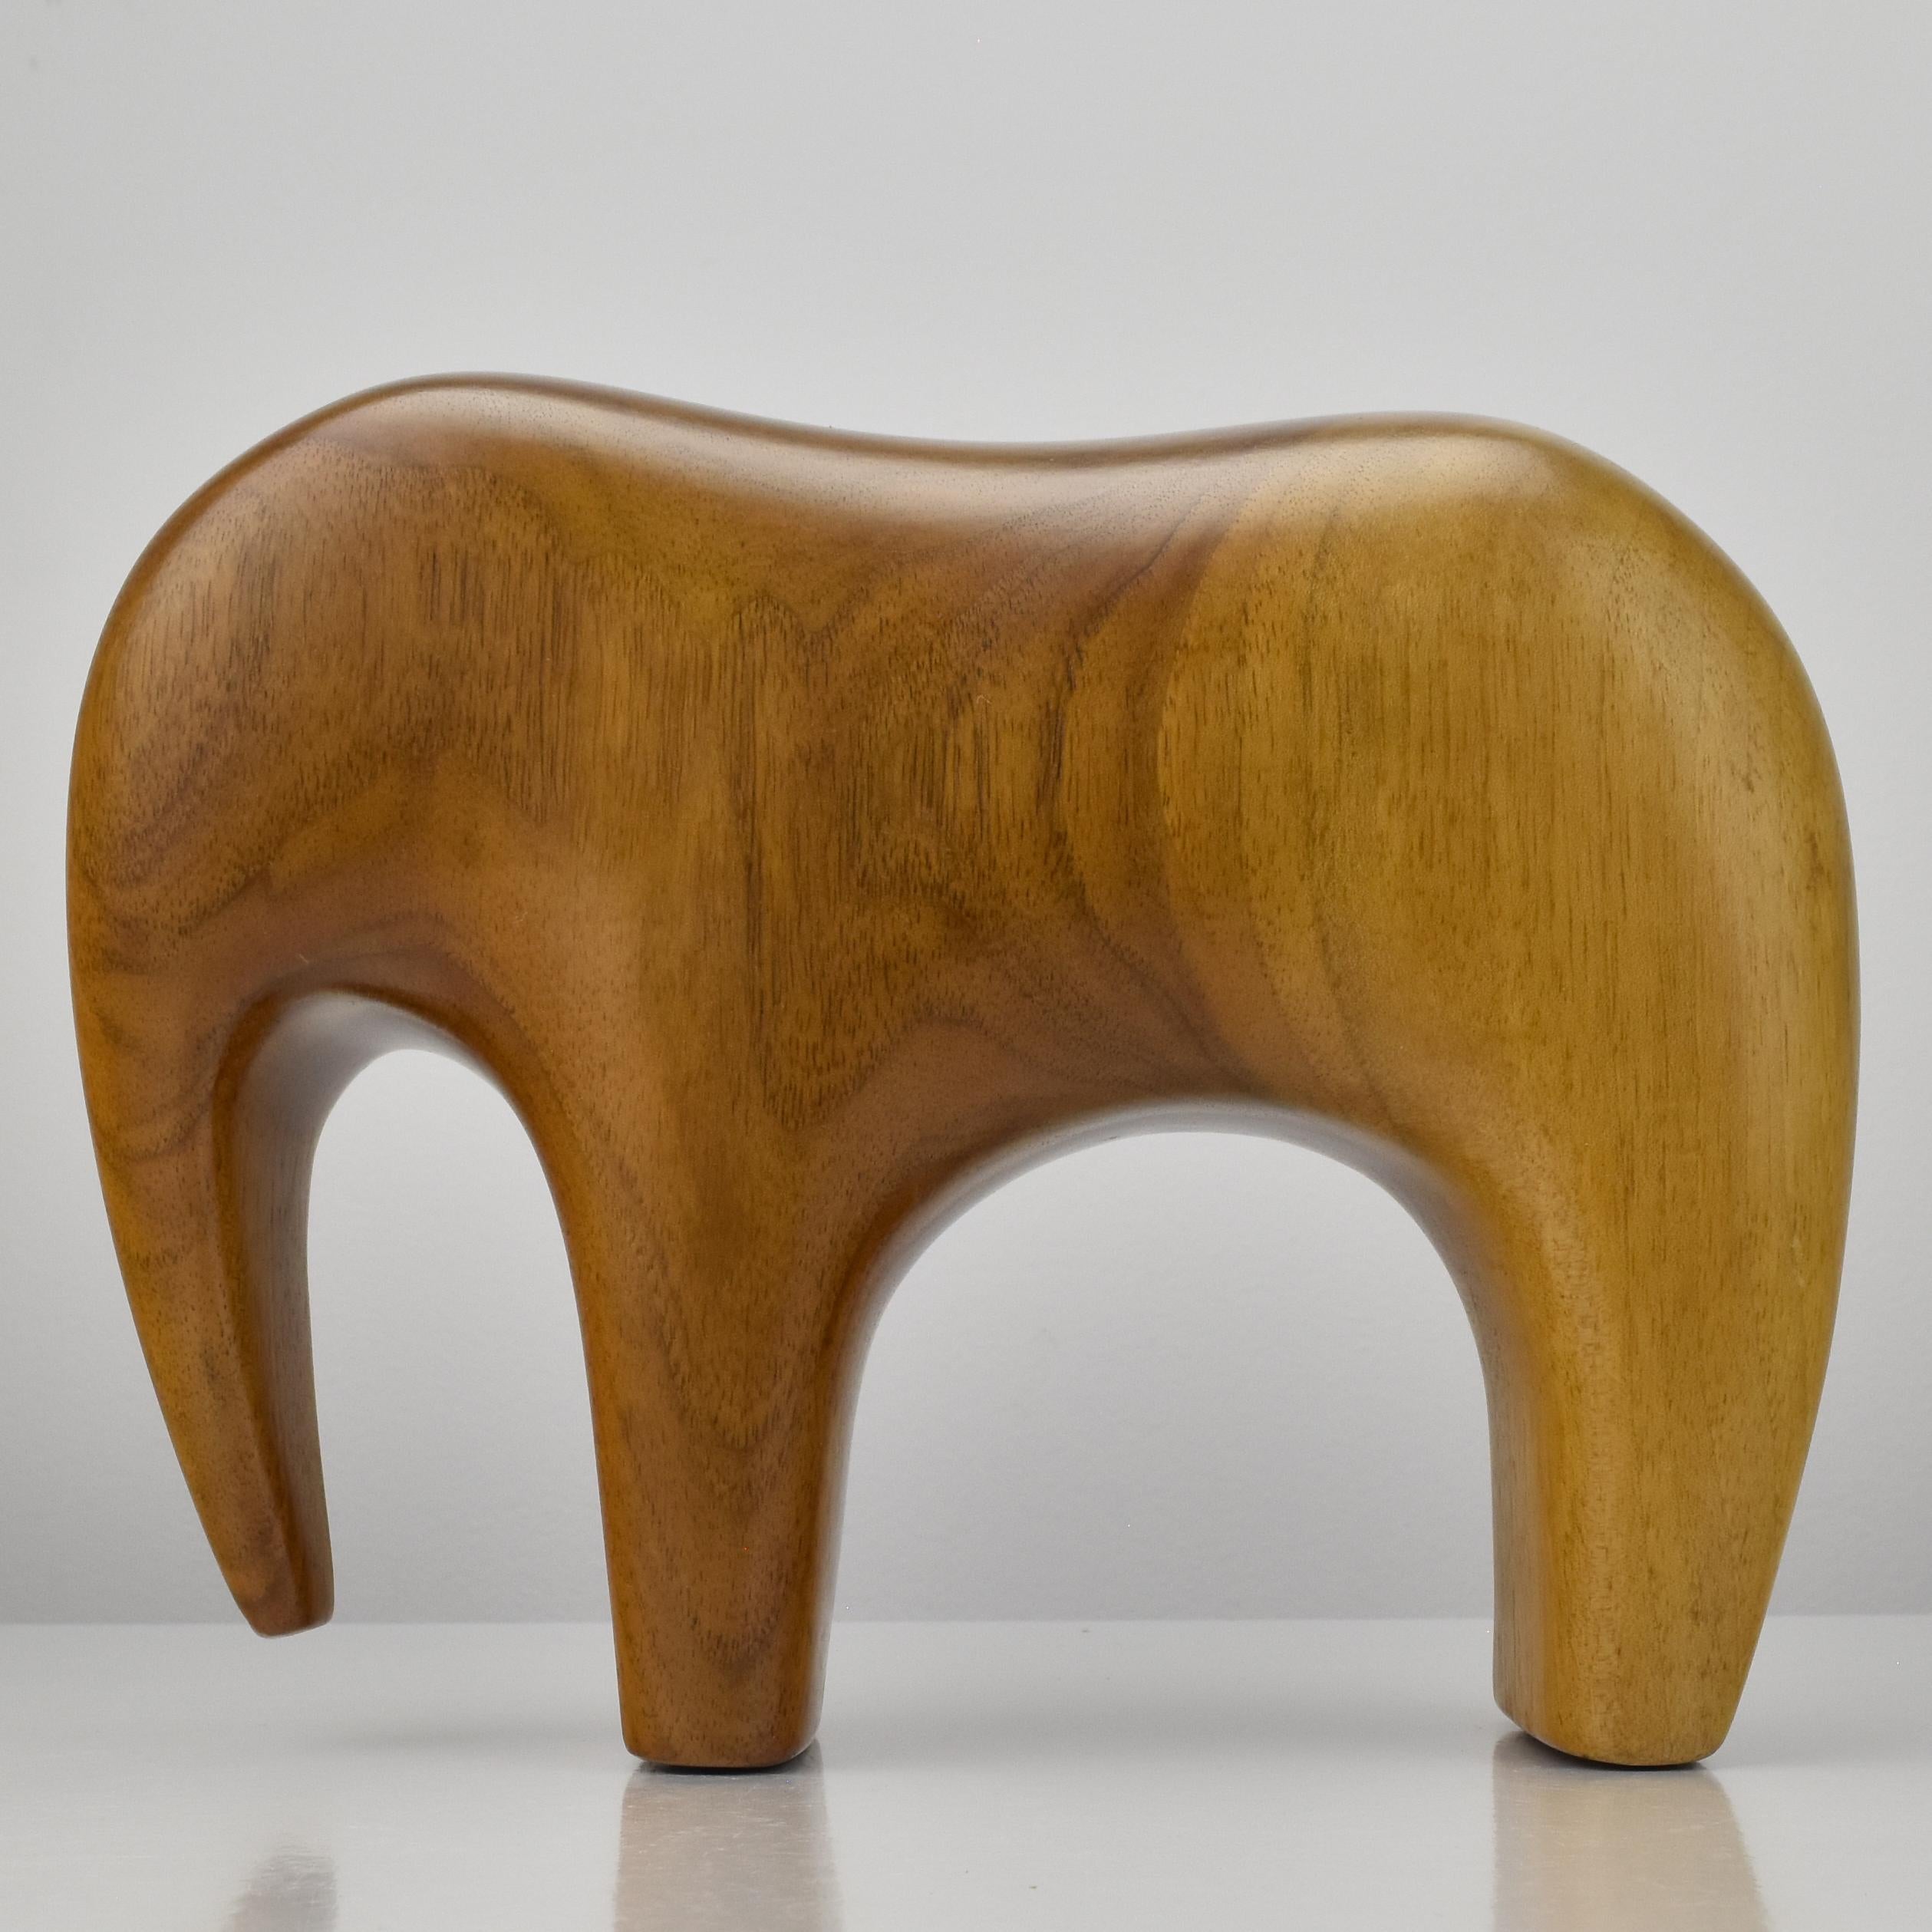 A  Minimalist hand-carved and polished teak wood elephant figurine in the style of Arne Tjomsland.

This sculpture is a perfect add-on for any Mid Century interior or a perfect gift for a collector of elephant figurines. 